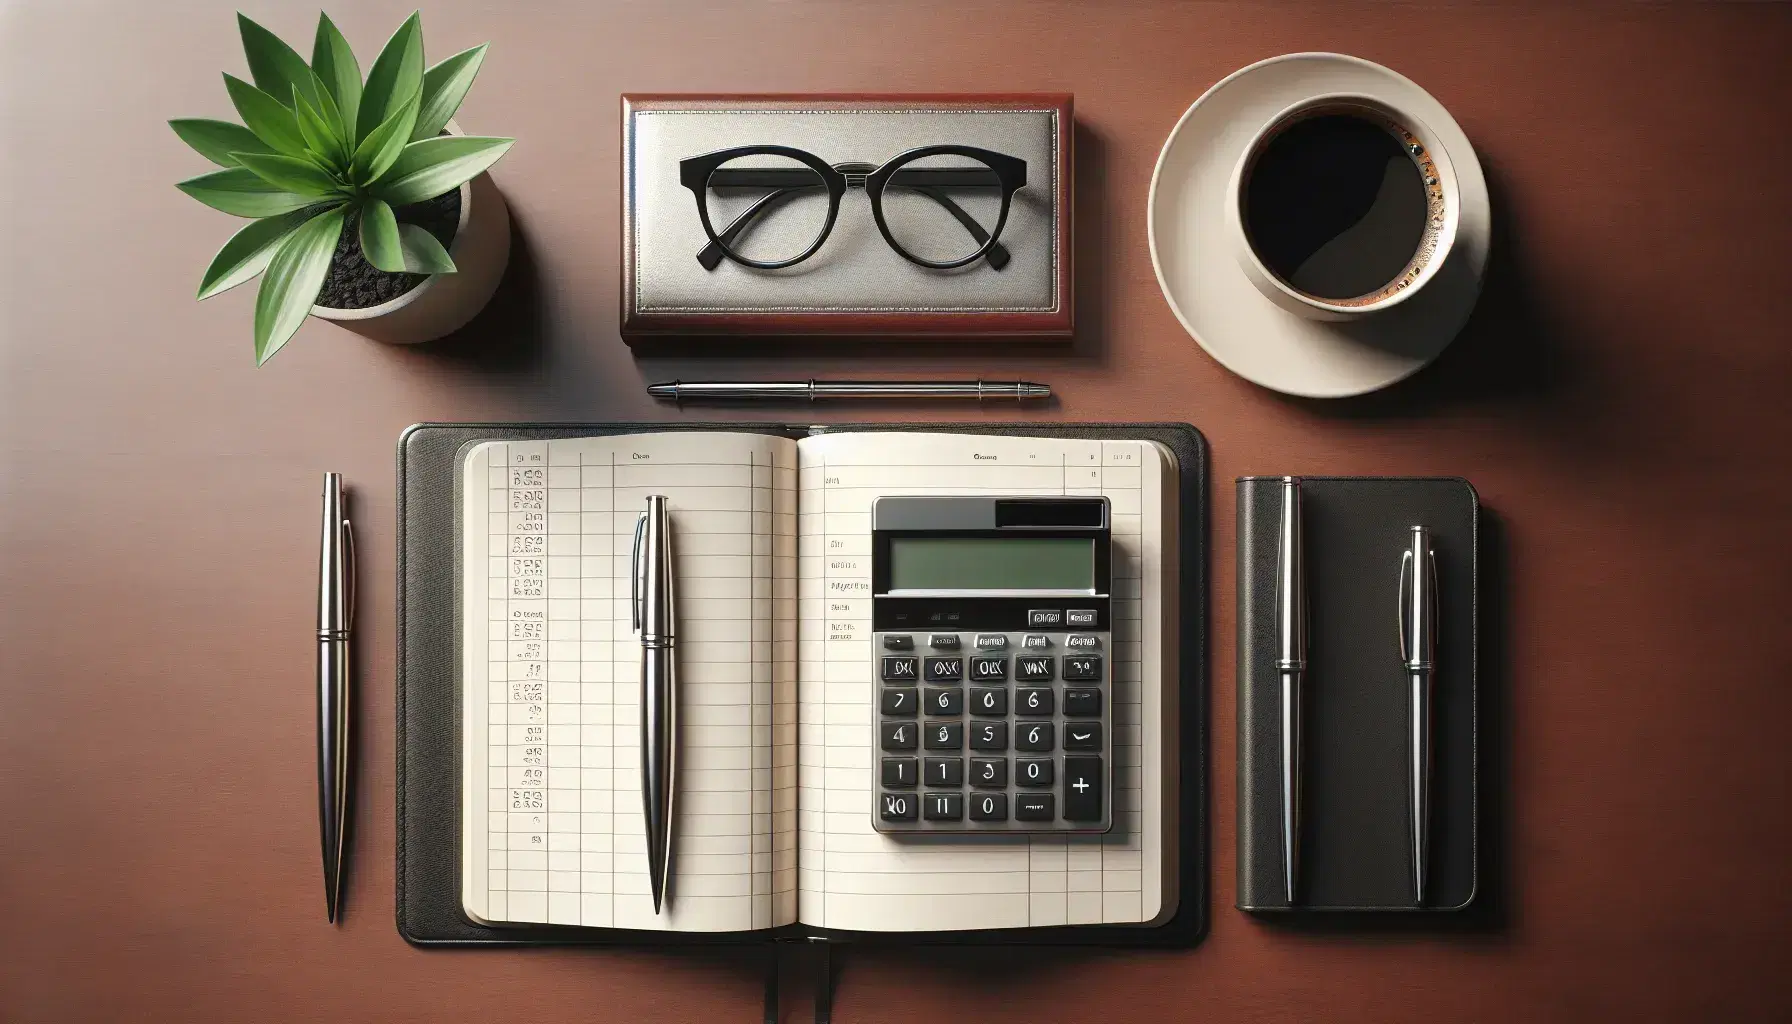 Organized office desk with calculator, eyeglasses, open ledger book, metallic pen, potted plant, and a cup of coffee on a mahogany surface.